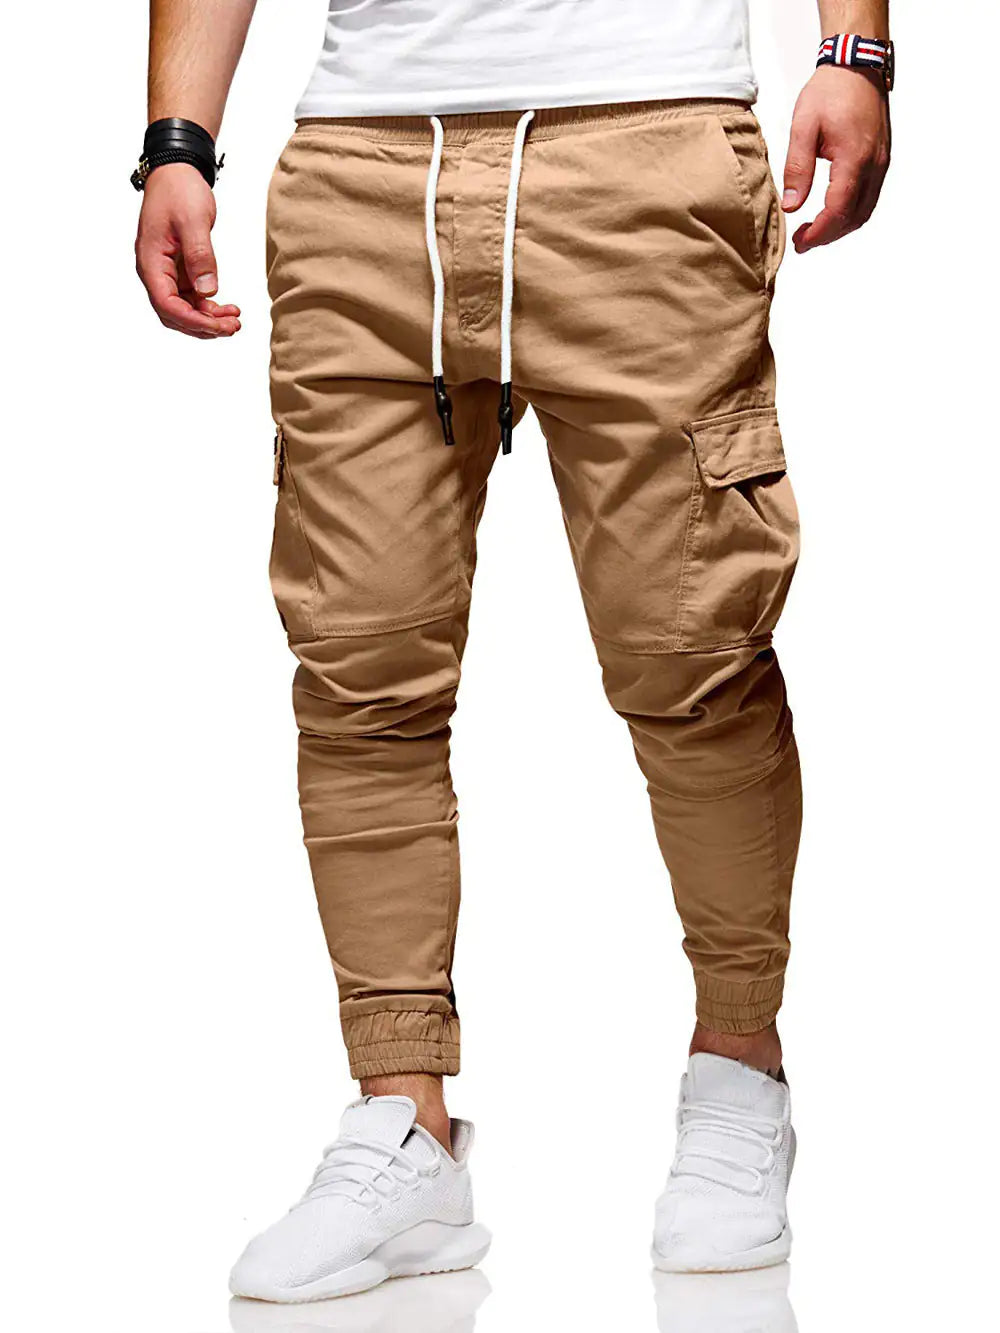 Thin Cotton Casual Pants